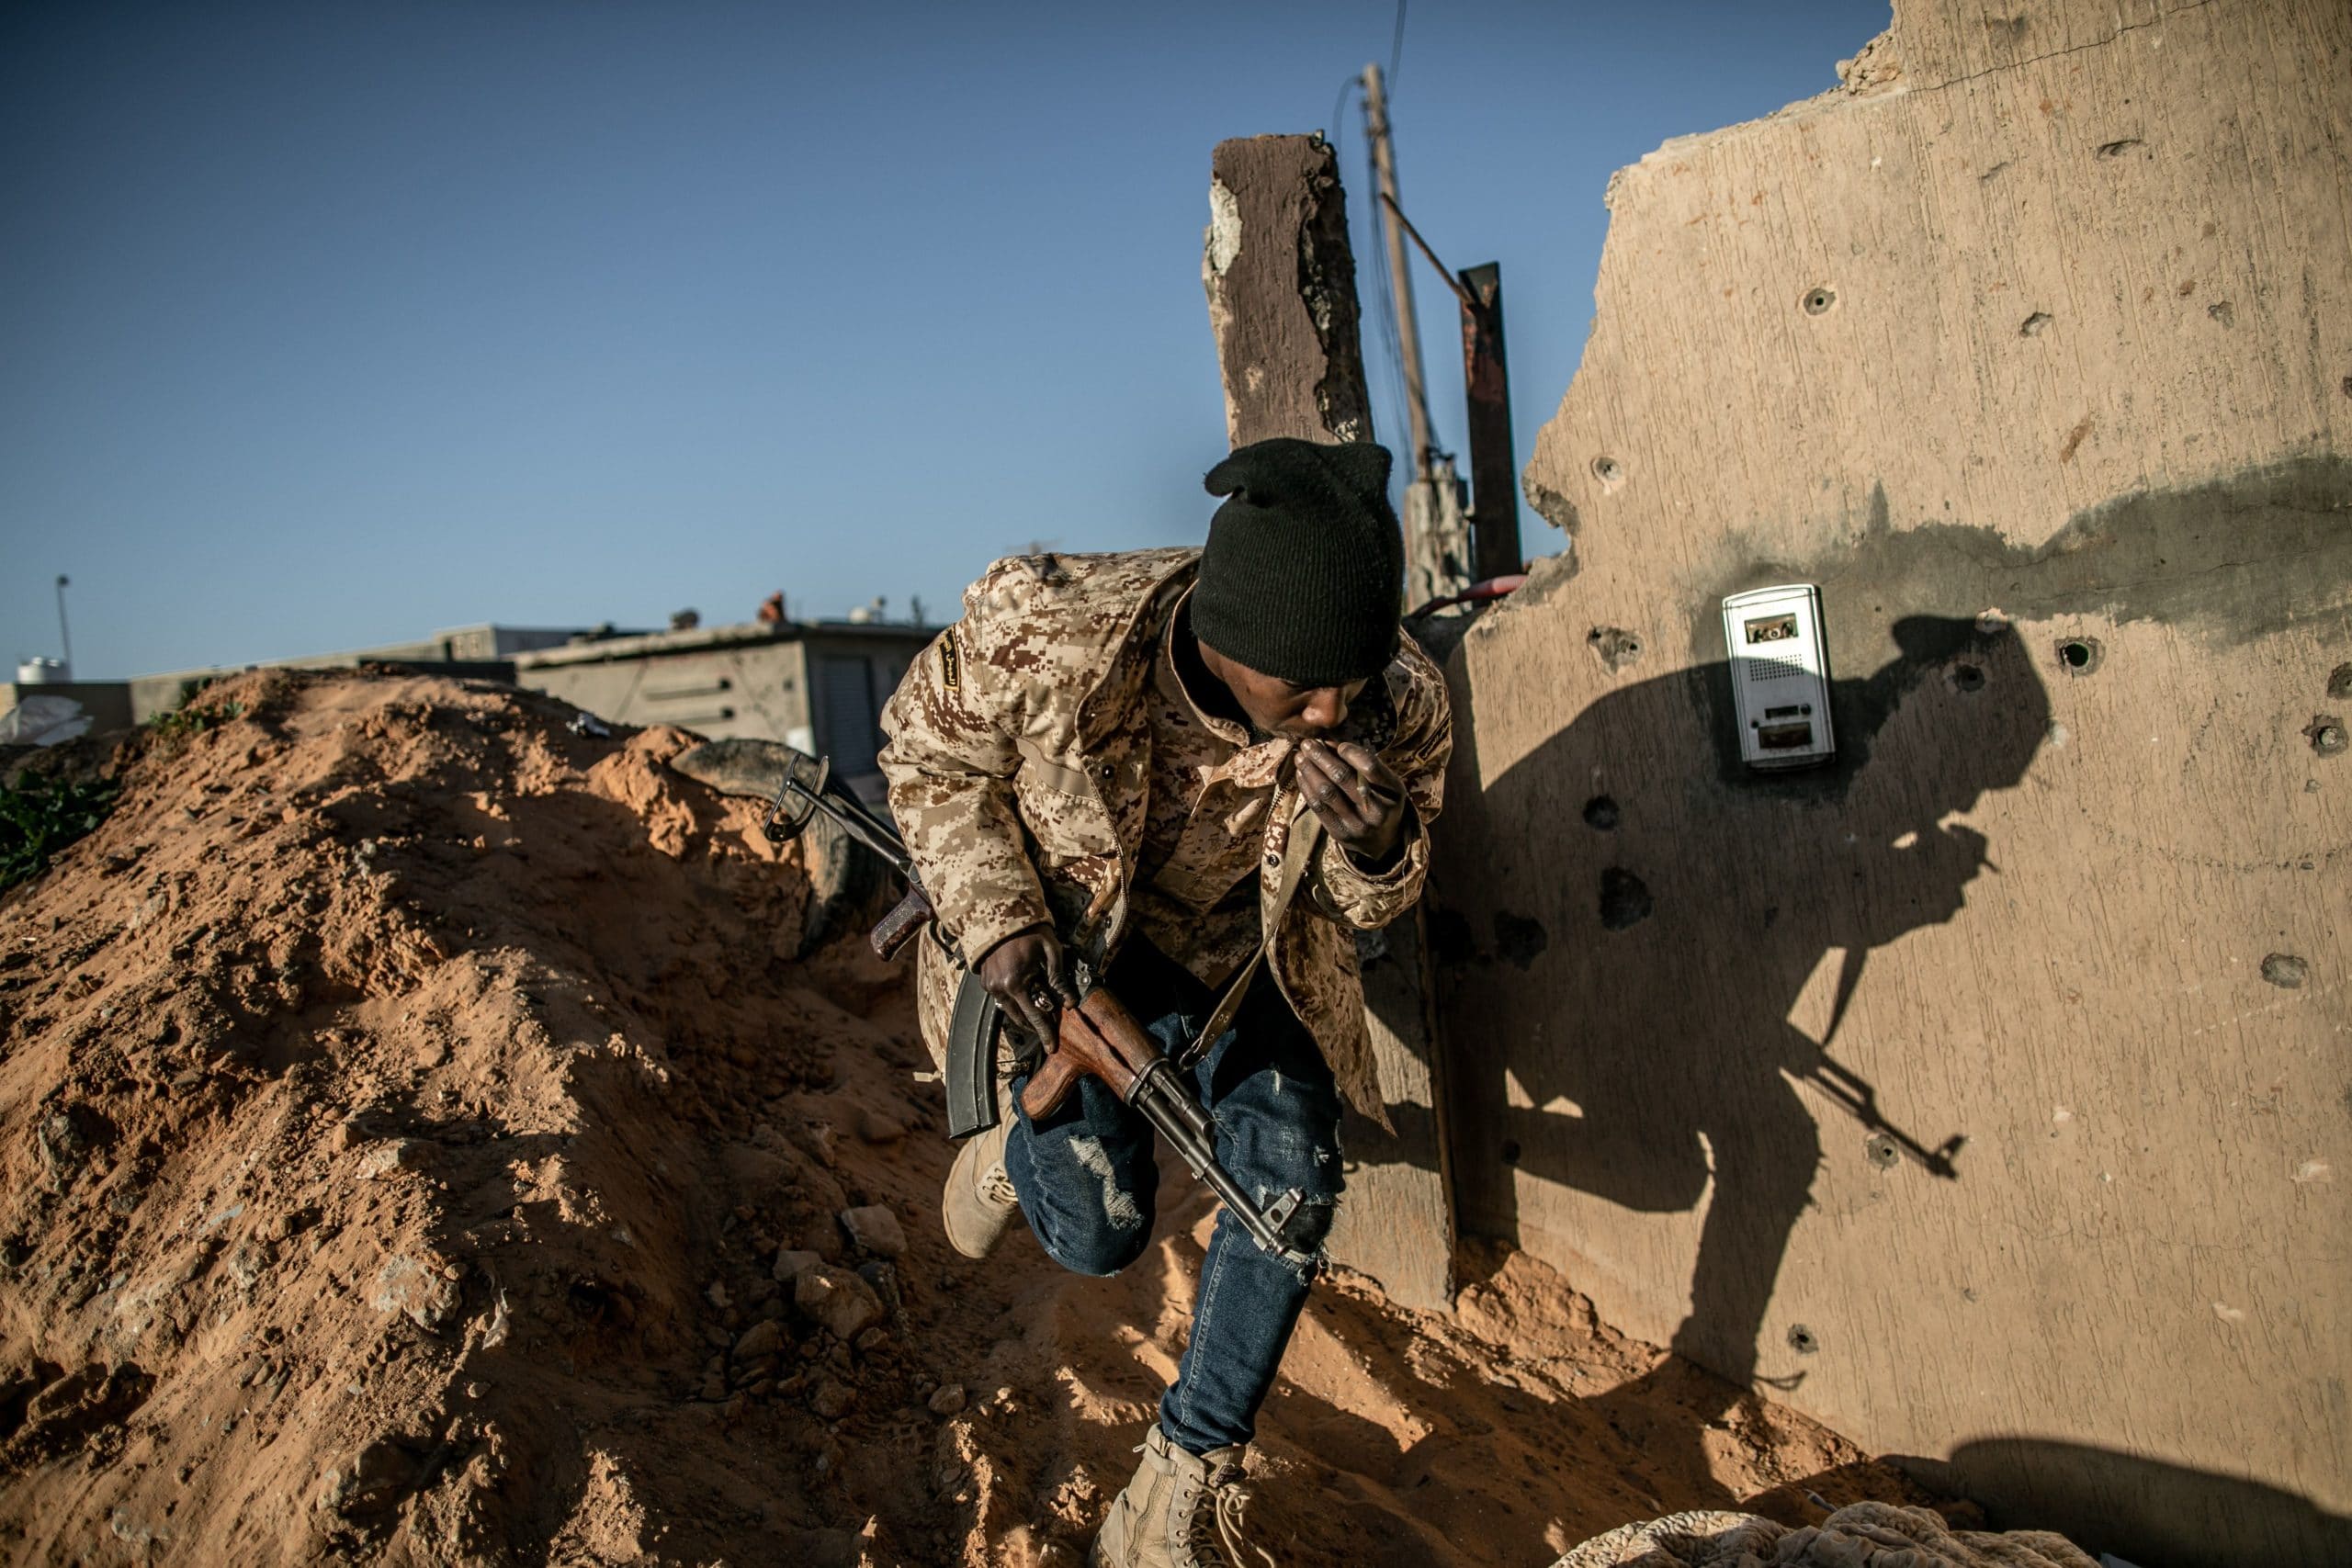 TRIPOLI, Feb. 29, 2020 (Xinhua) -- A fighter of the UN-backed Government of National Accord (GNA) takes cover during clashes with east-based Libyan National Army (LNA) forces in Ain Zara frontline in Tripoli, Libya, on Feb. 29, 2020. The east-based army under General Khalifa Haftar has been leading a military campaign since April 2019 in and around Tripoli, attempting to take over the city and topple the GNA. (Photo by Amru Salahuddien/Xinhua) - Pan Xiaojing -//CHINENOUVELLE_XxjpbeE007571_20200229_PEPFN0A001/2003011128/Credit:CHINE NOUVELLE/SIPA/2003011130